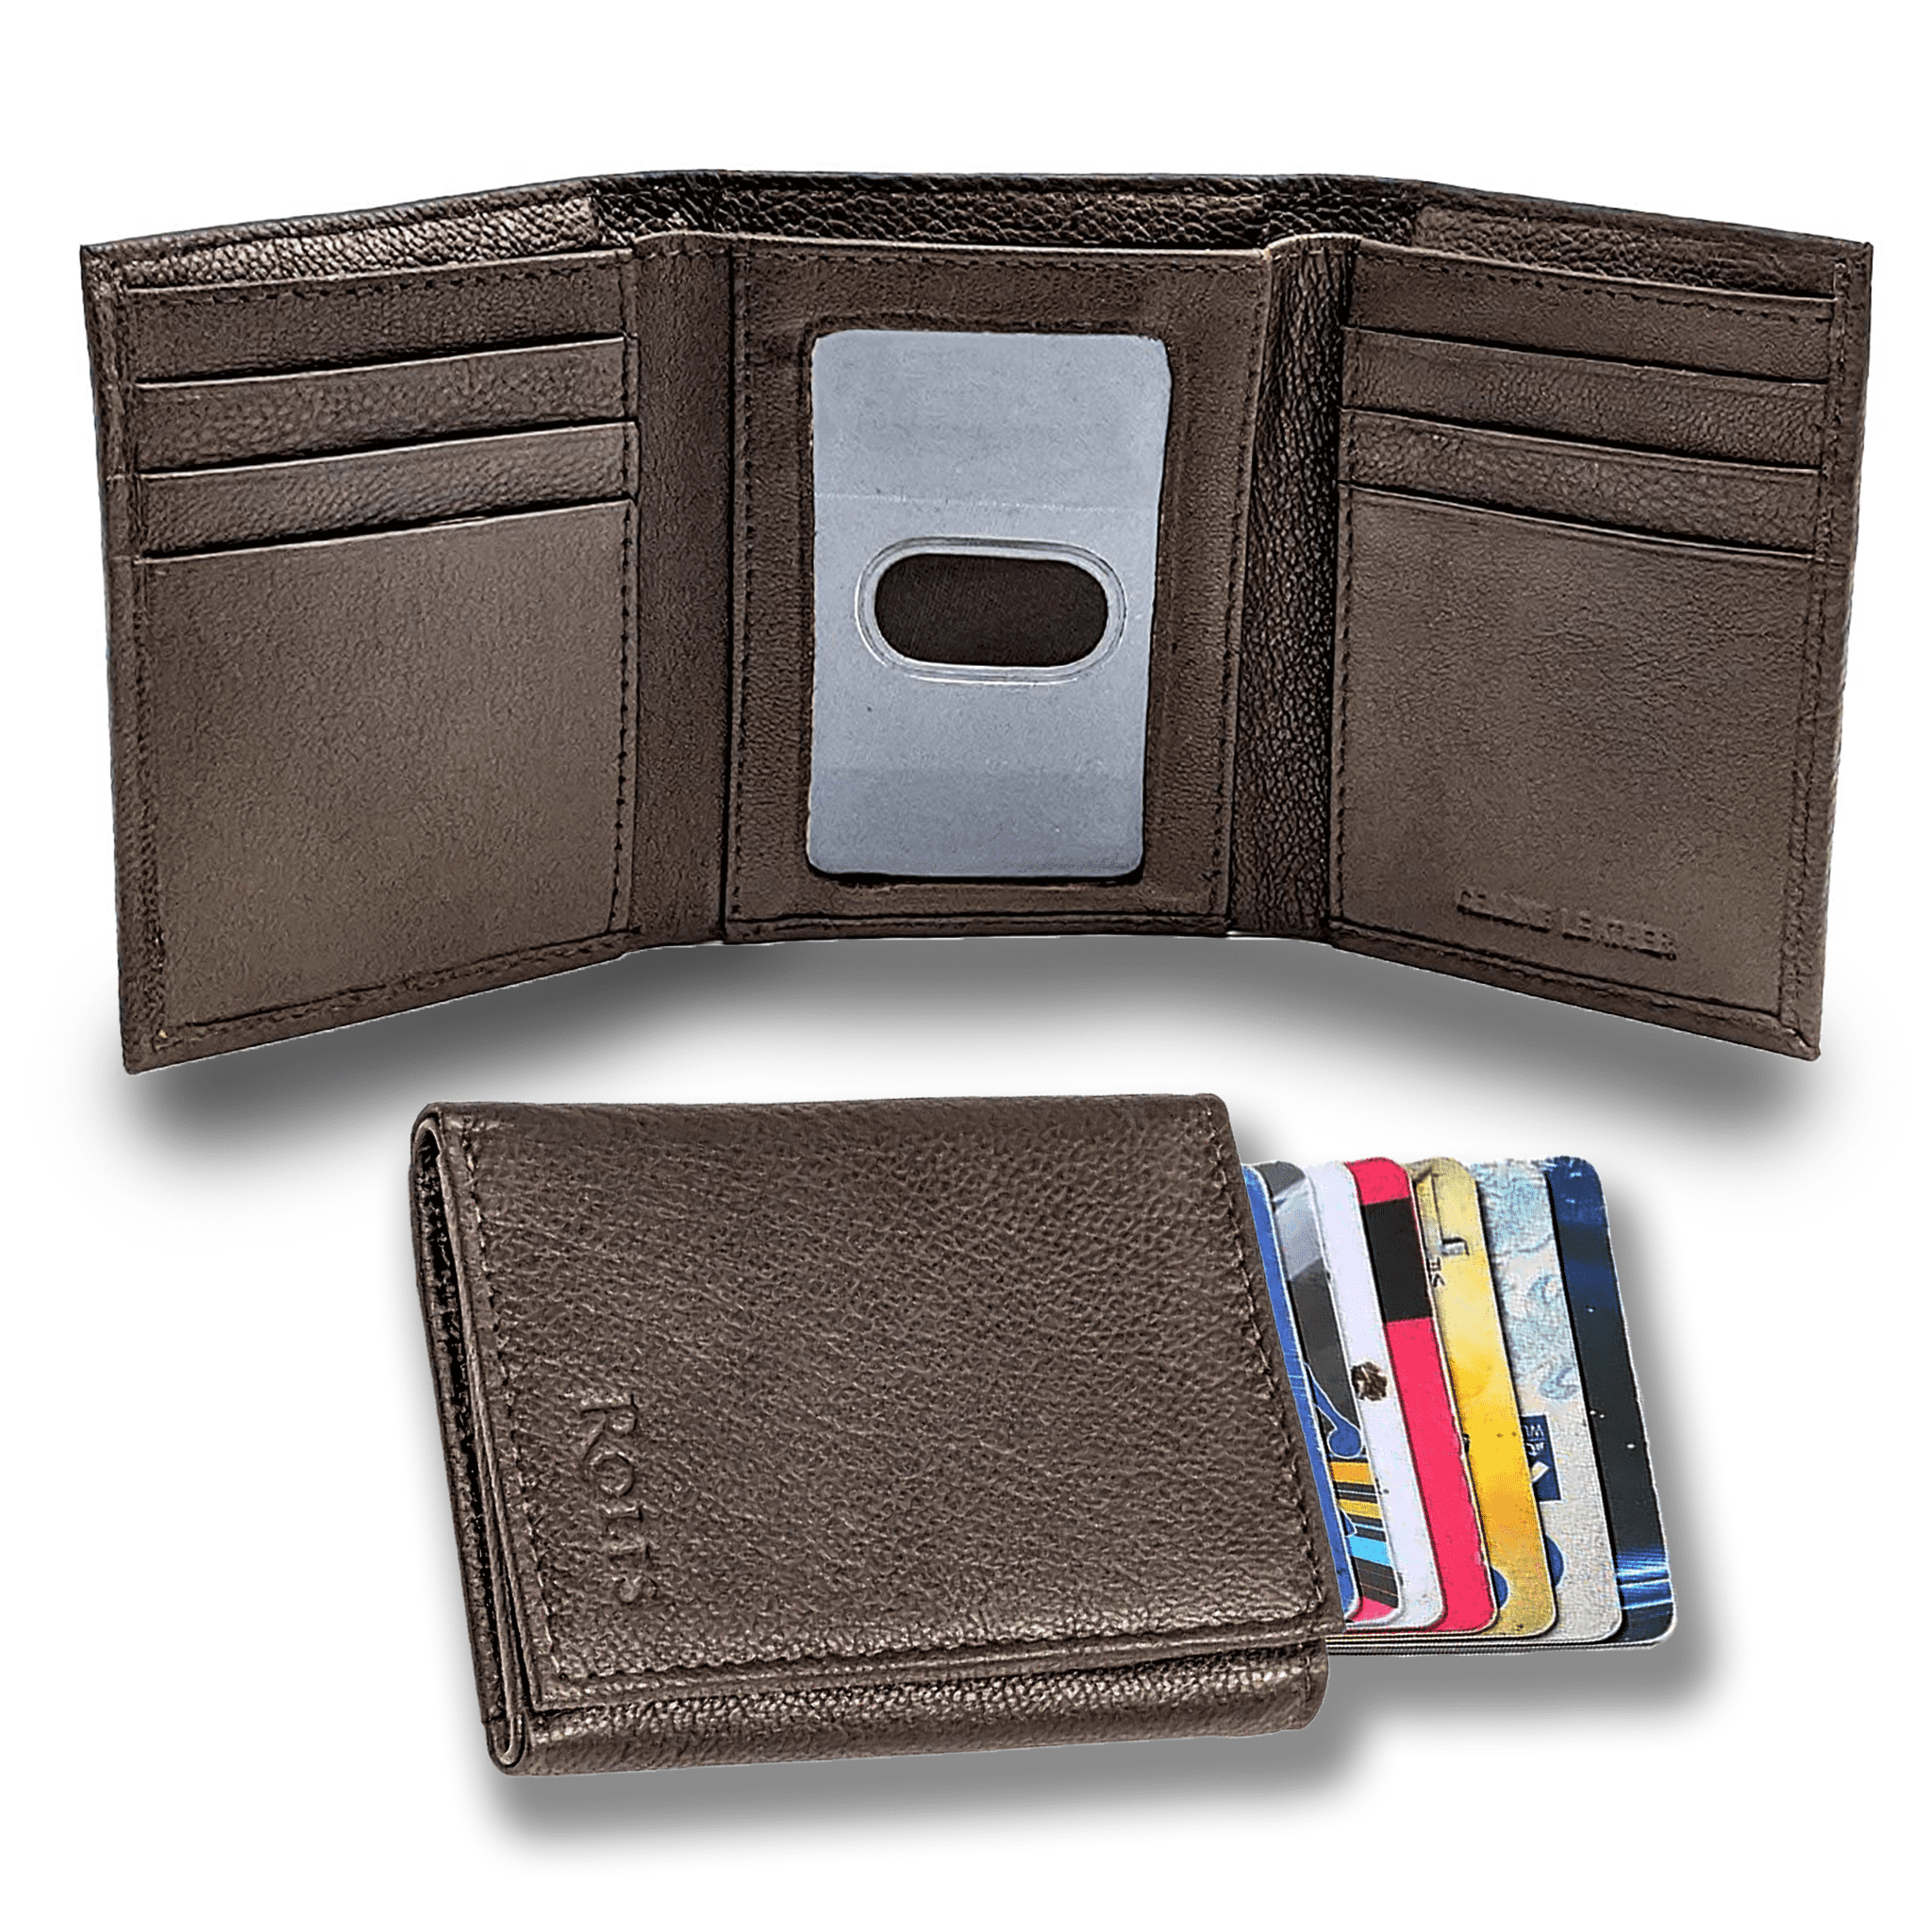 St. Louis Cardinals Leather Tri-Fold Wallet - Brown